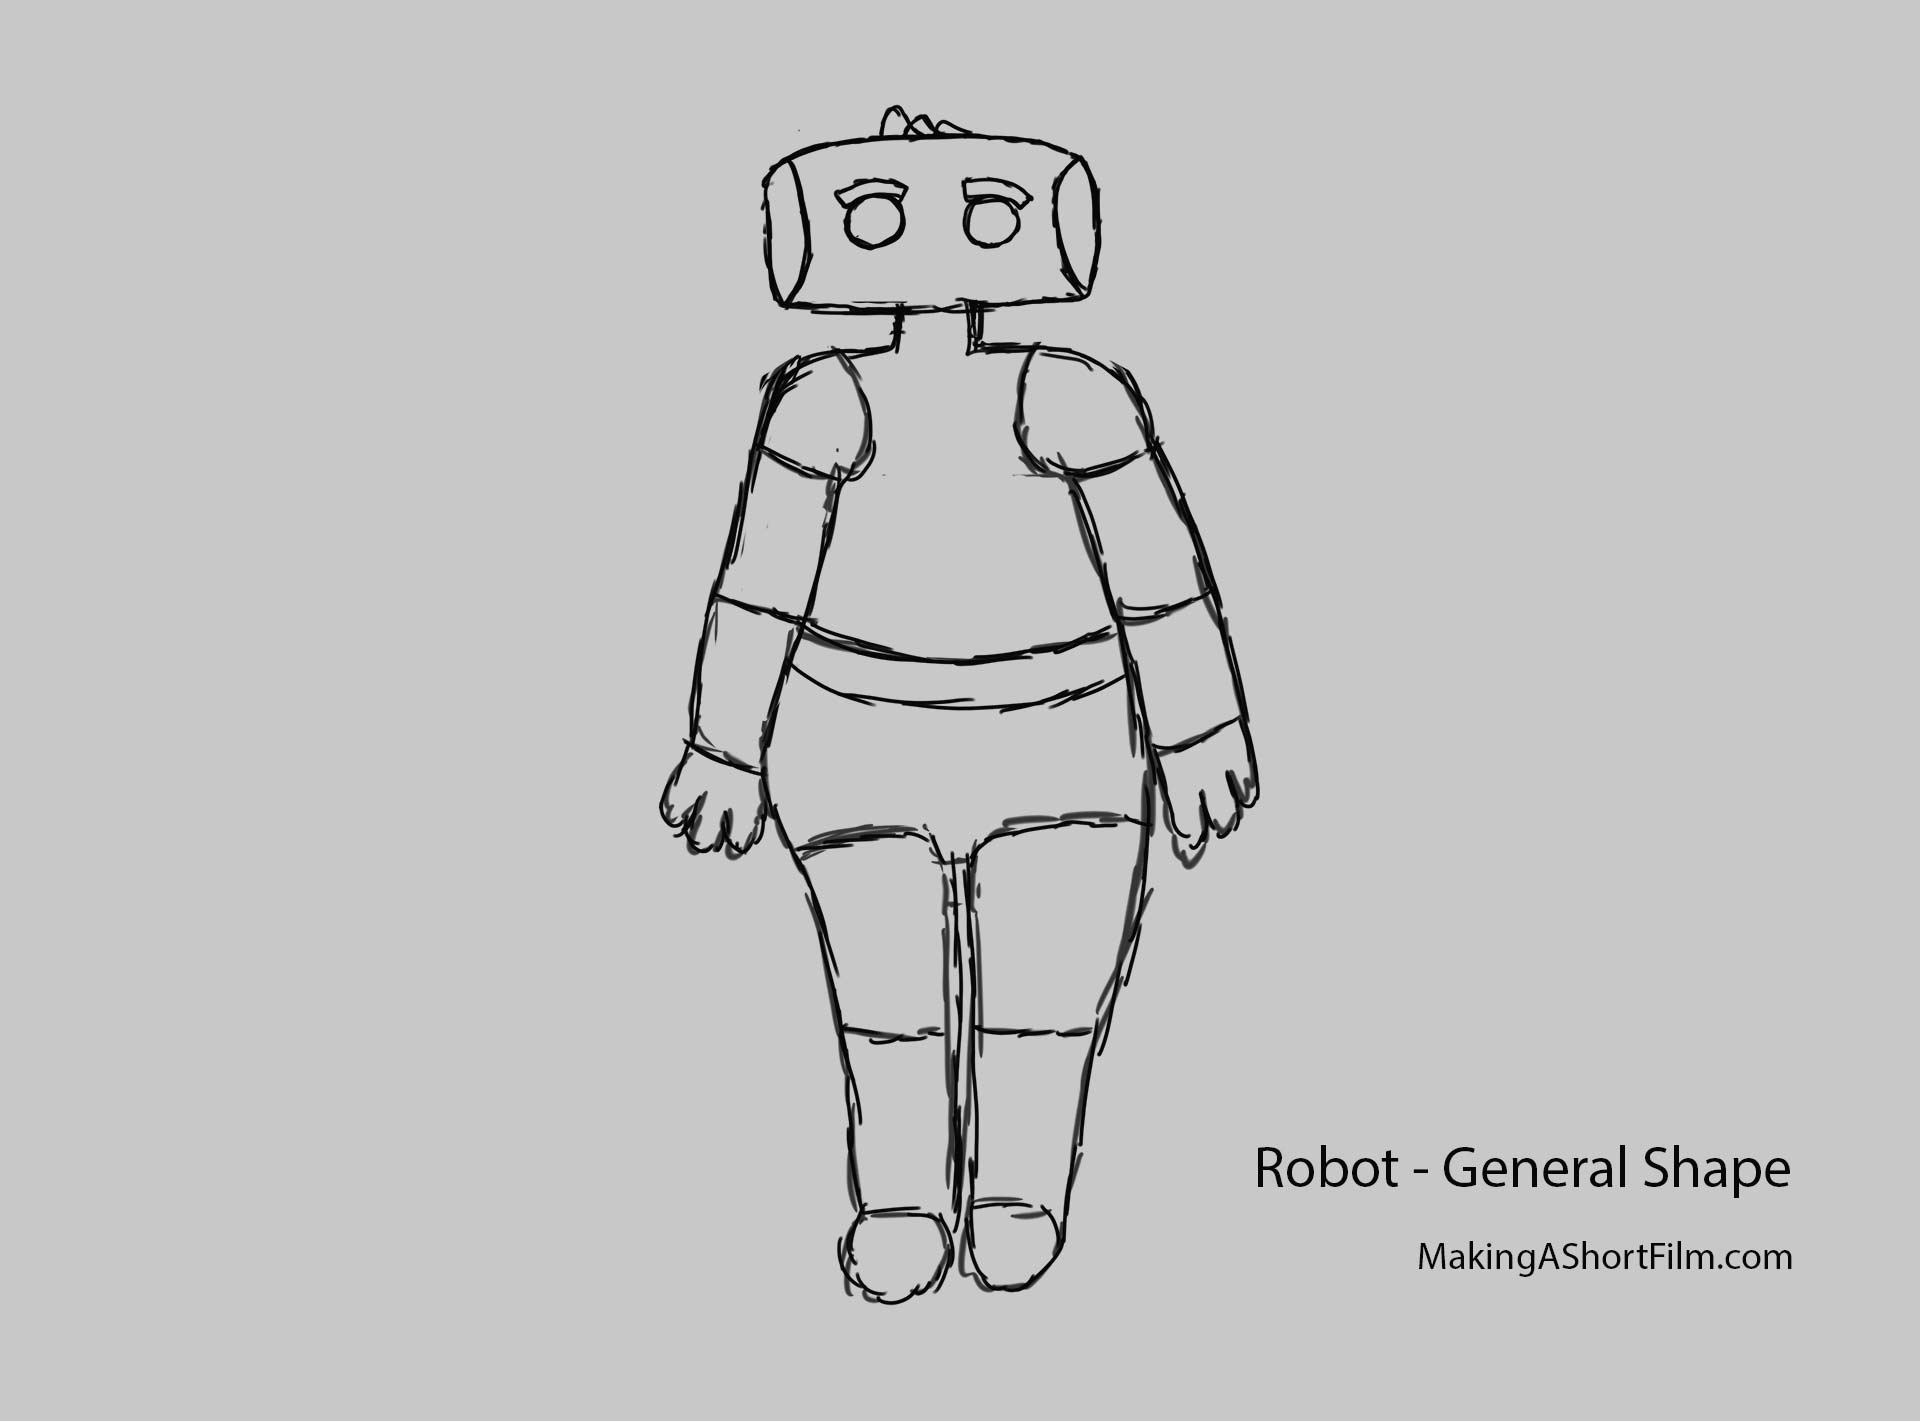 The General Body Shape of the Robot